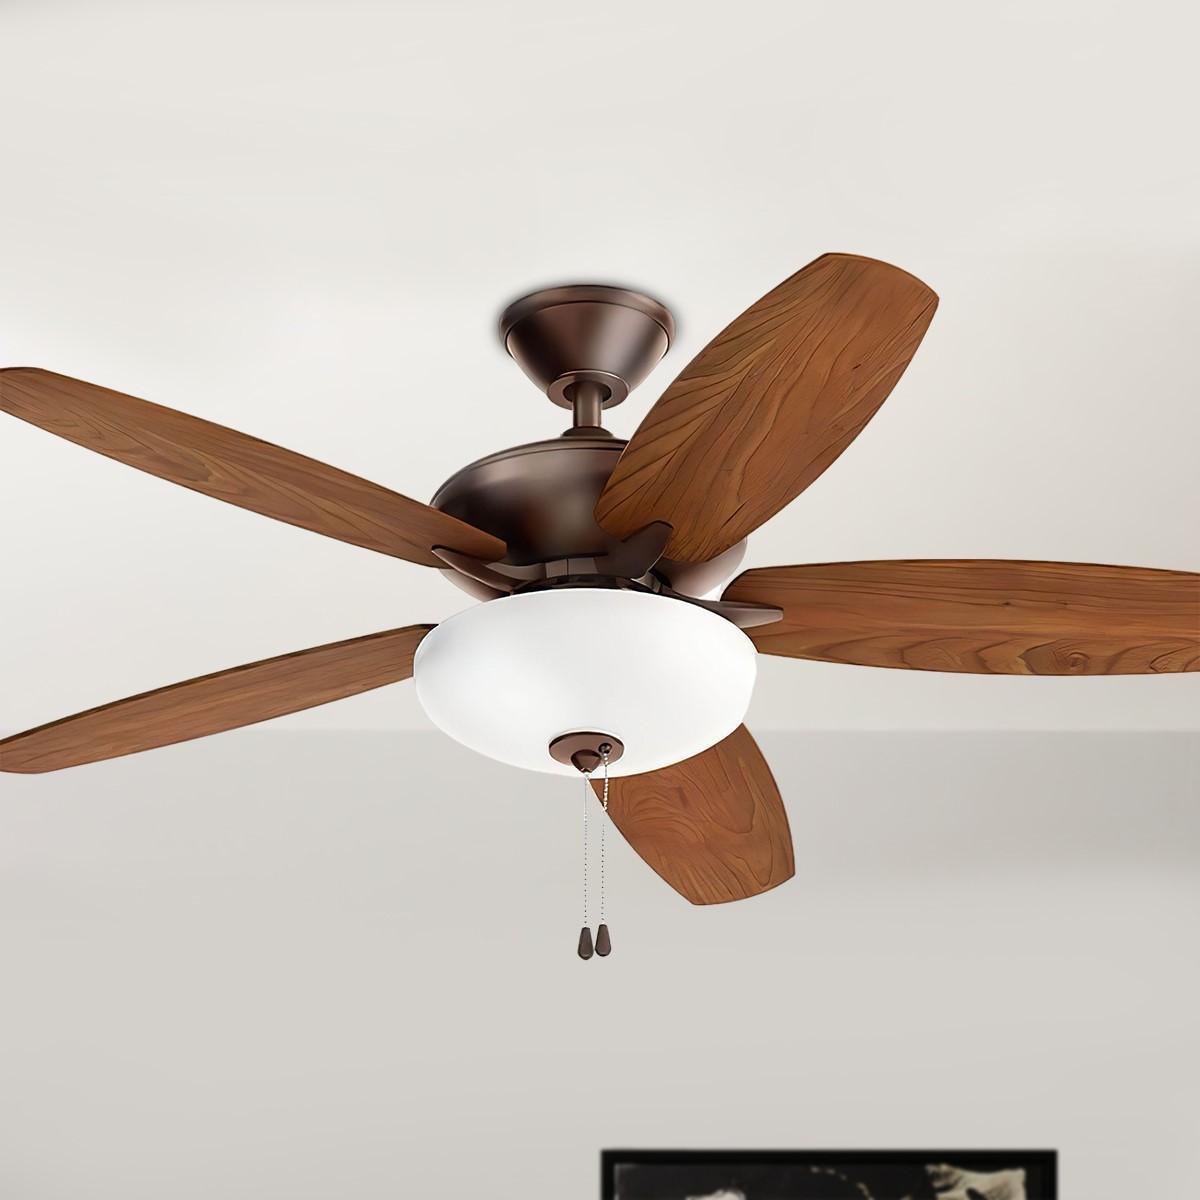 Renew Select 52 Inch Contemporary Ceiling Fan With Light